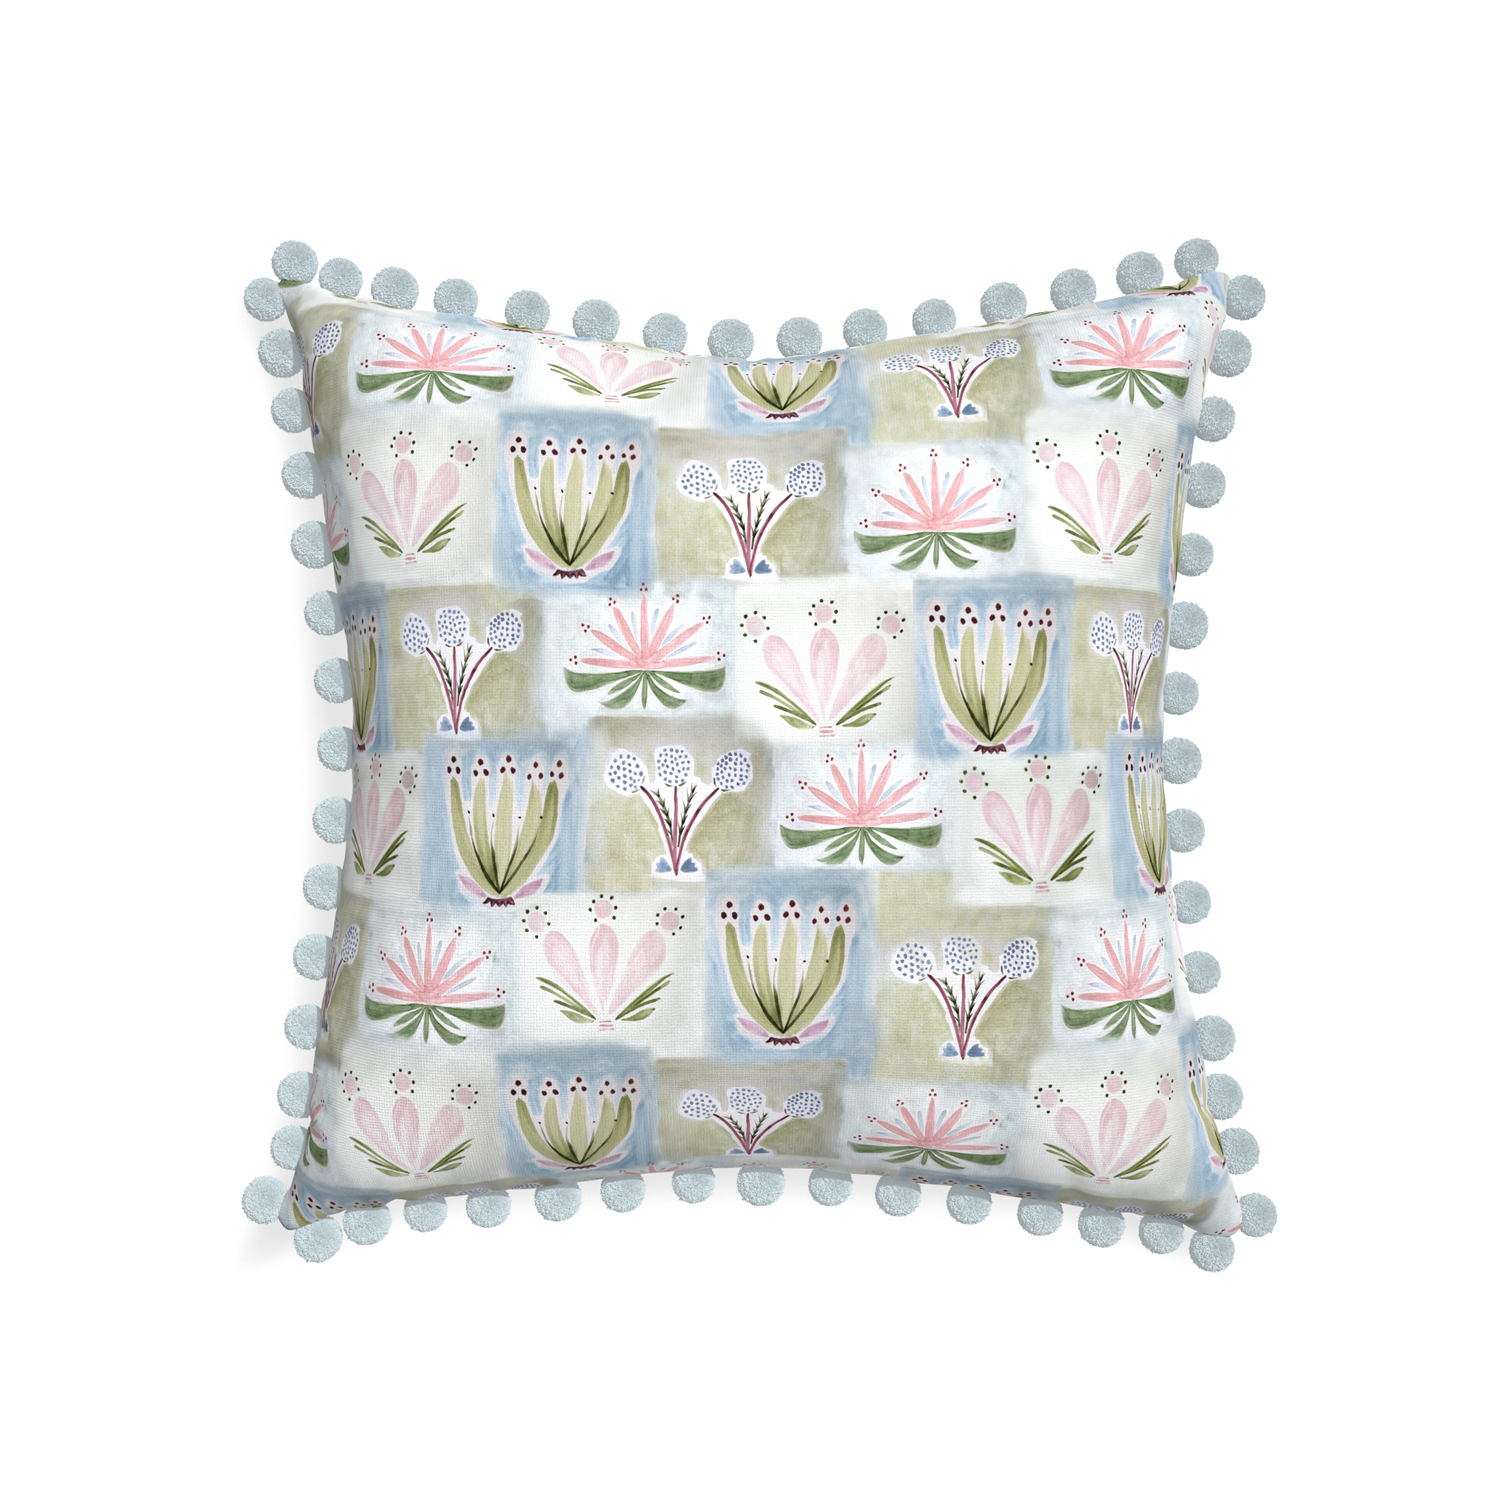 22-square harper custom hand-painted floralpillow with powder pom pom on white background